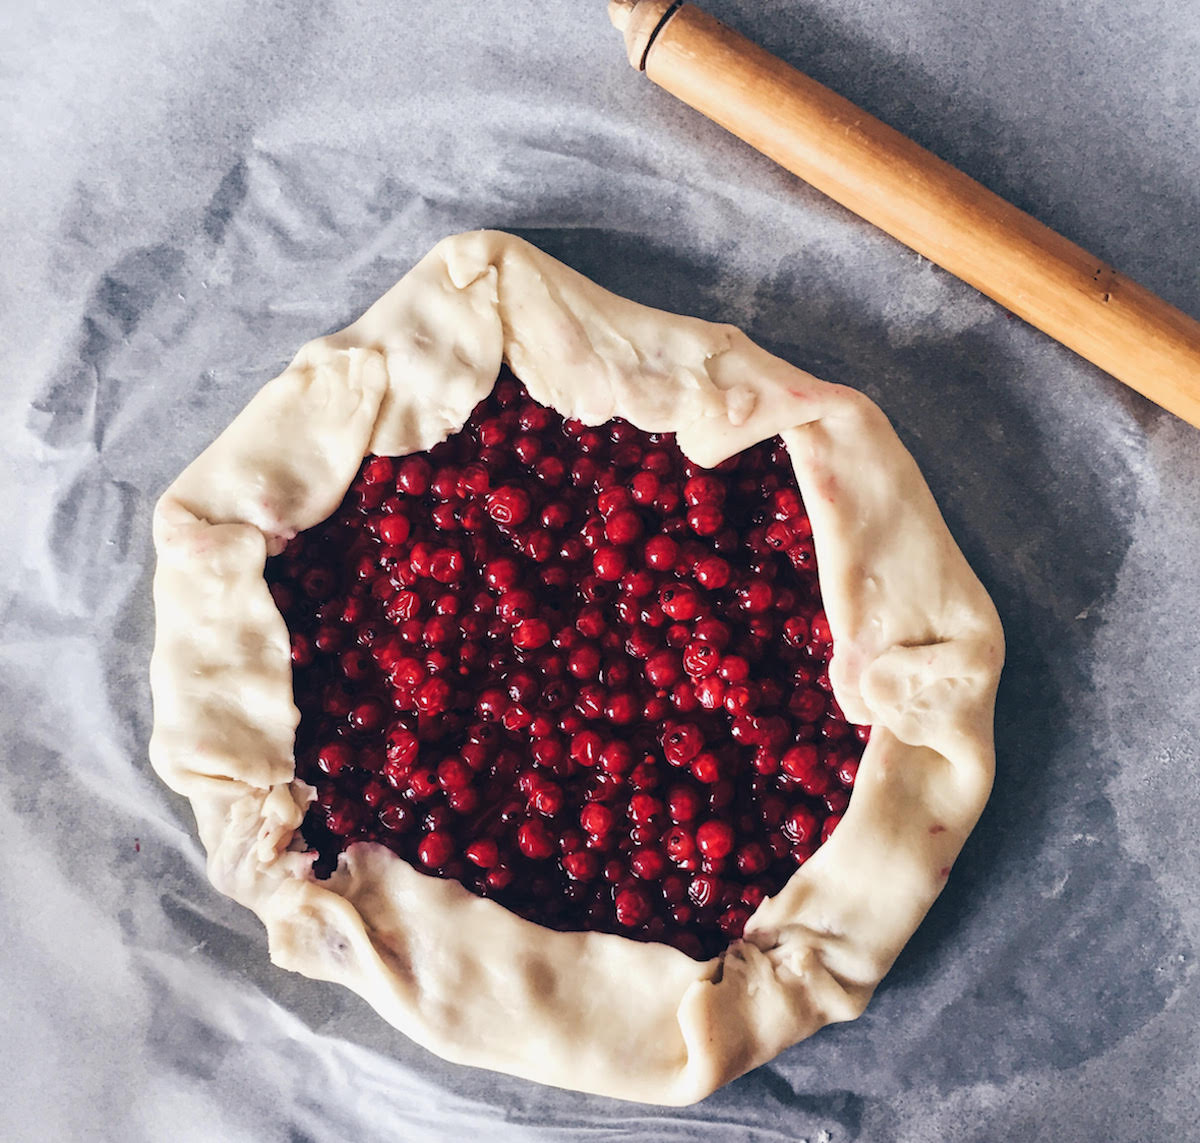 @pfairytale Red Currant Galette